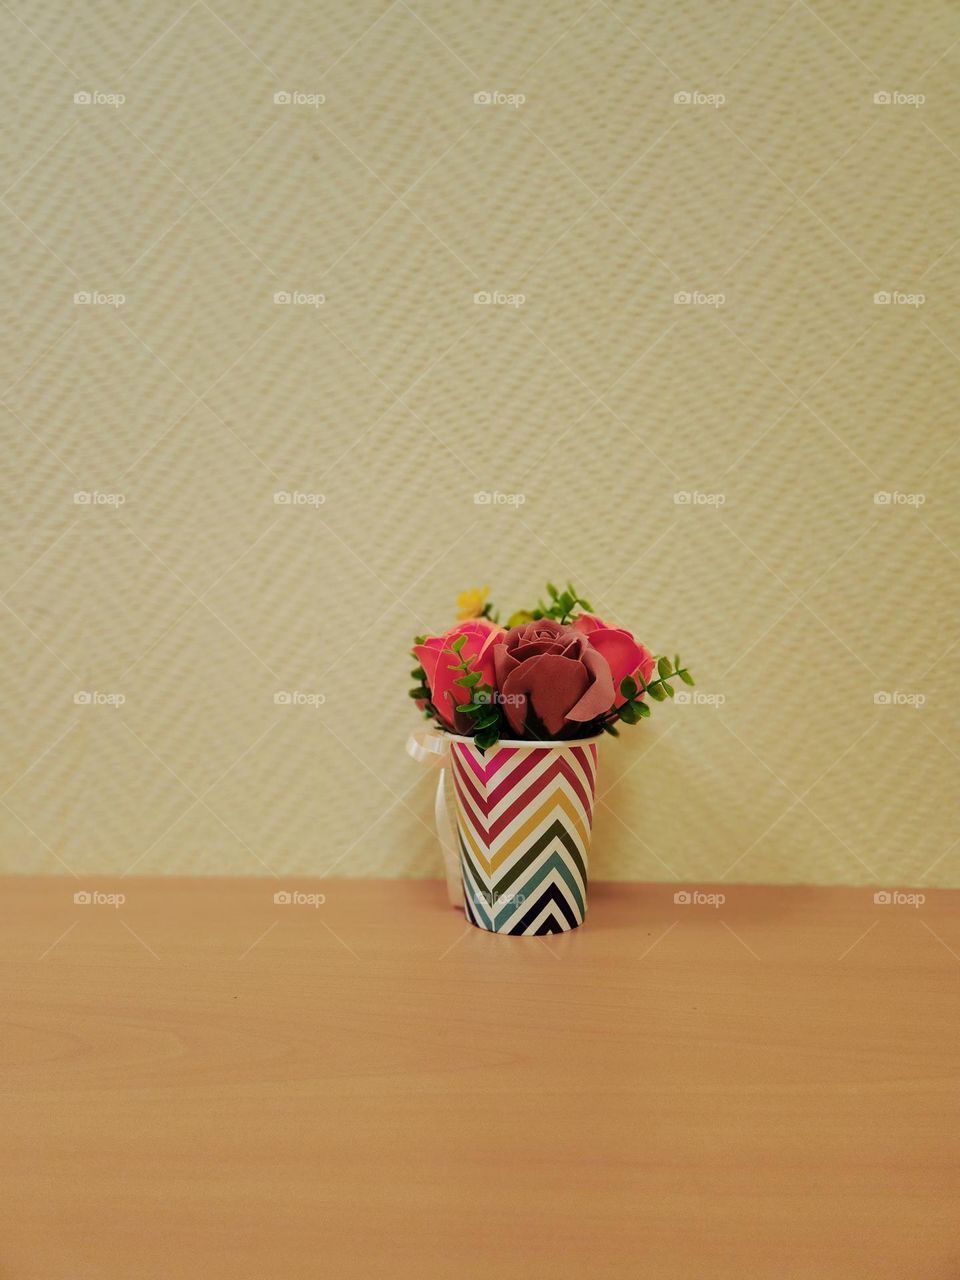 Flowers in a paper vase against a yellow background